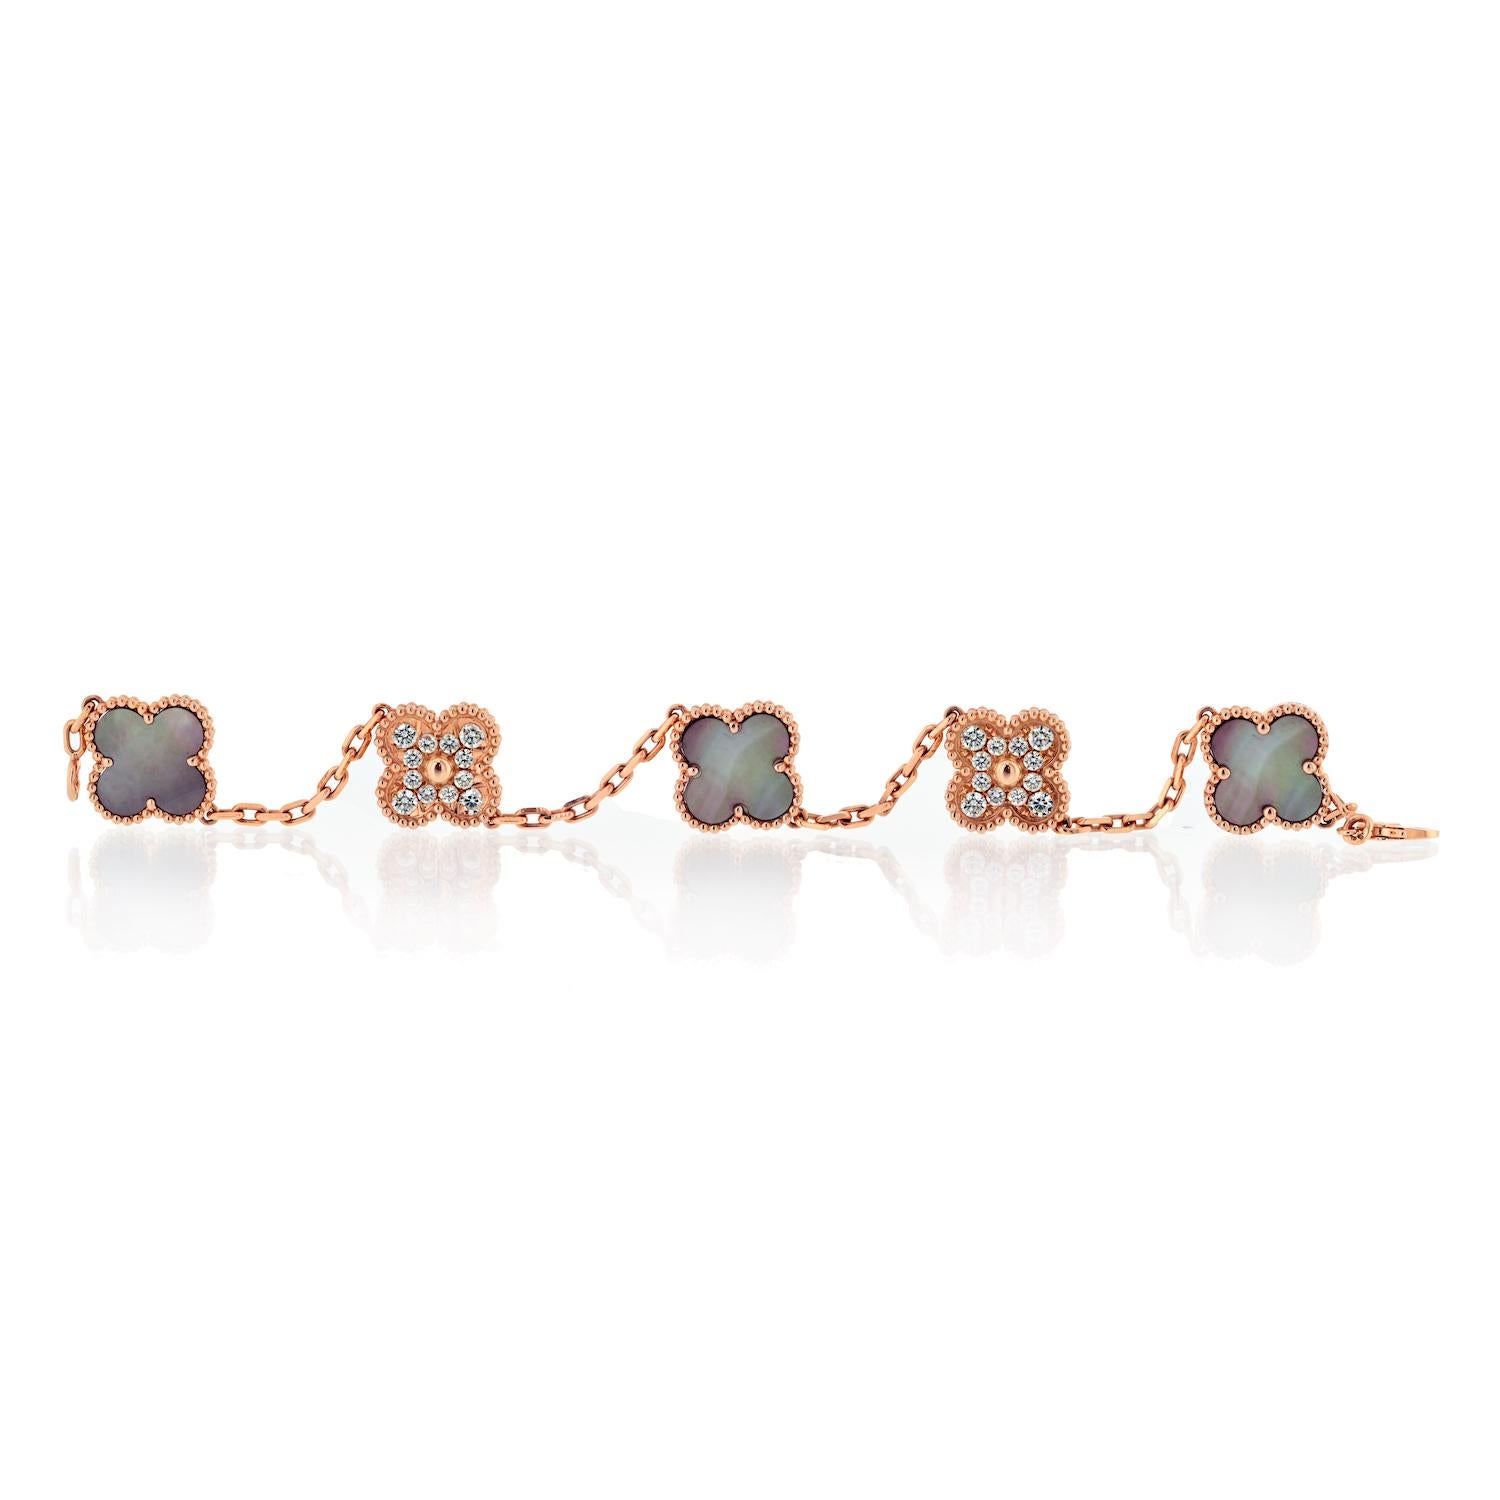 Van Cleef & Arpels 18KR Gold 5 Motif Grey Mother Of Pearl And Diamond Bracelet.

Crafted meticulously with 18K rose gold, this exquisite bracelet features five meticulously crafted motifs adorned with the finest materials.

Each motif is delicately